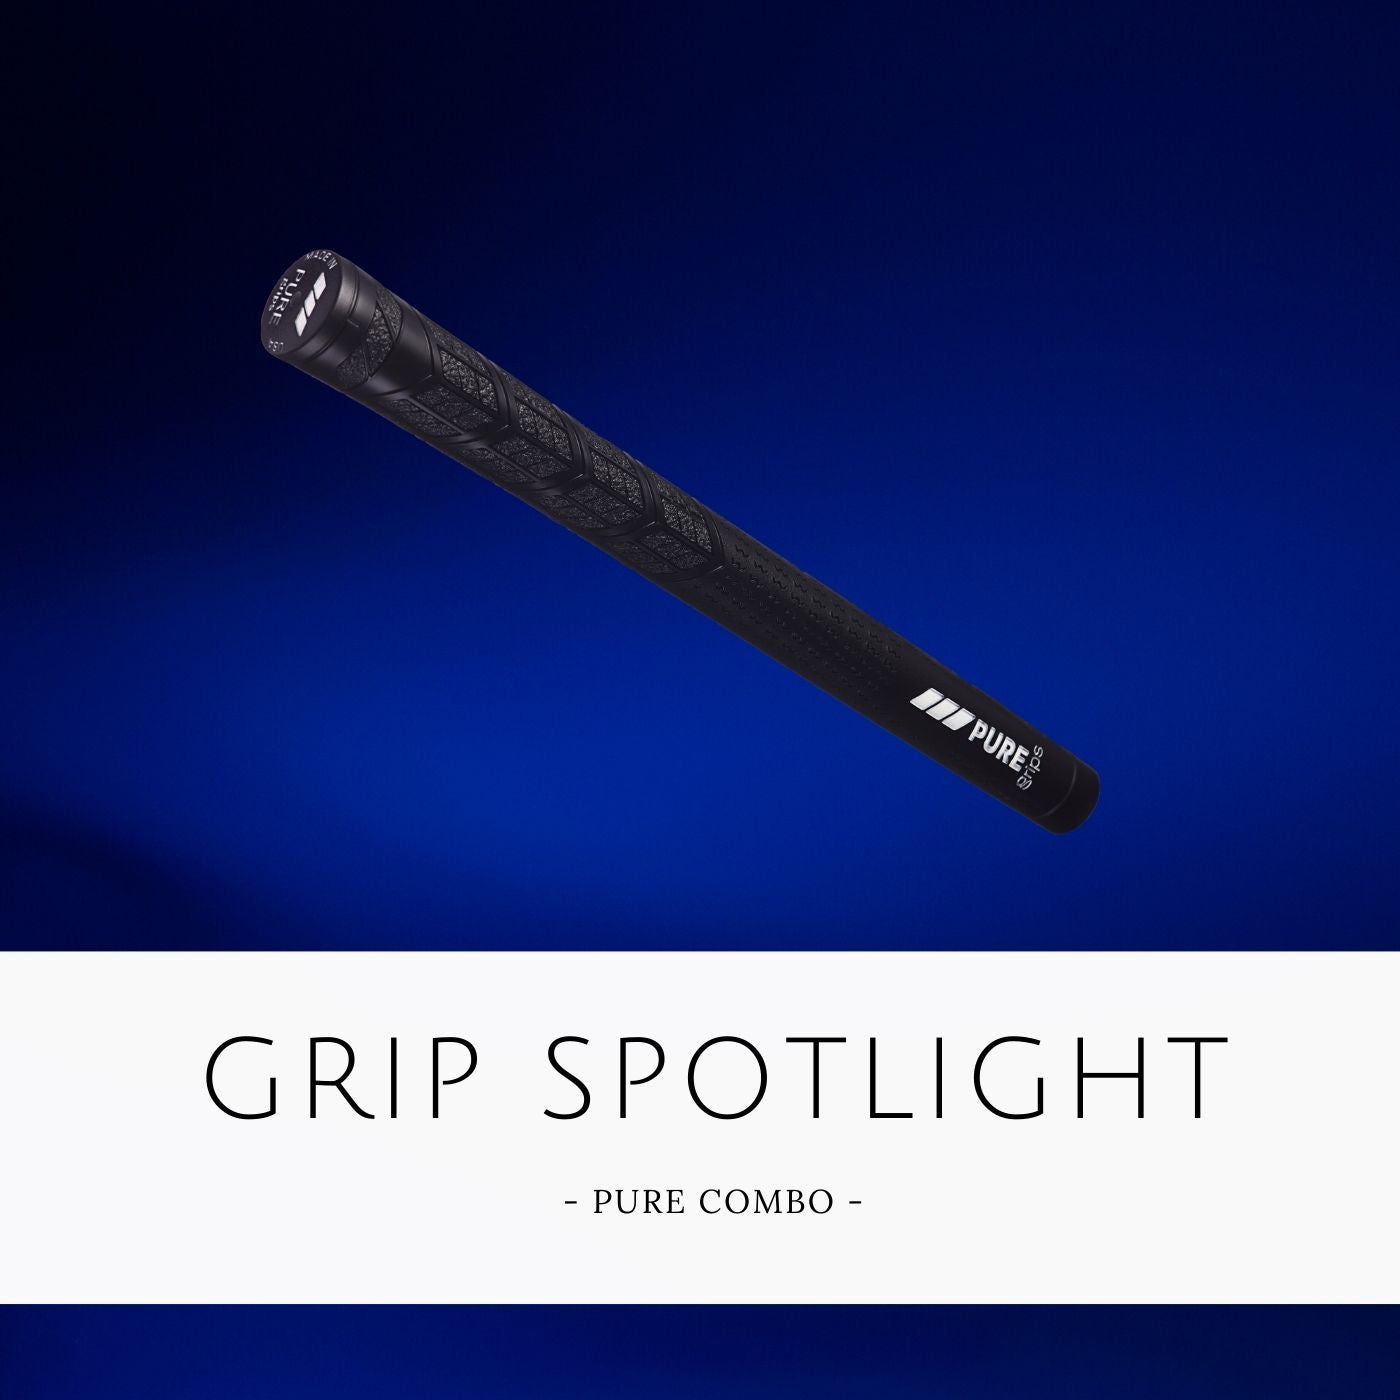 Golf Grip Spotlight on the New PURE Grips PURE Combo dual texture golf grip with reduced taper